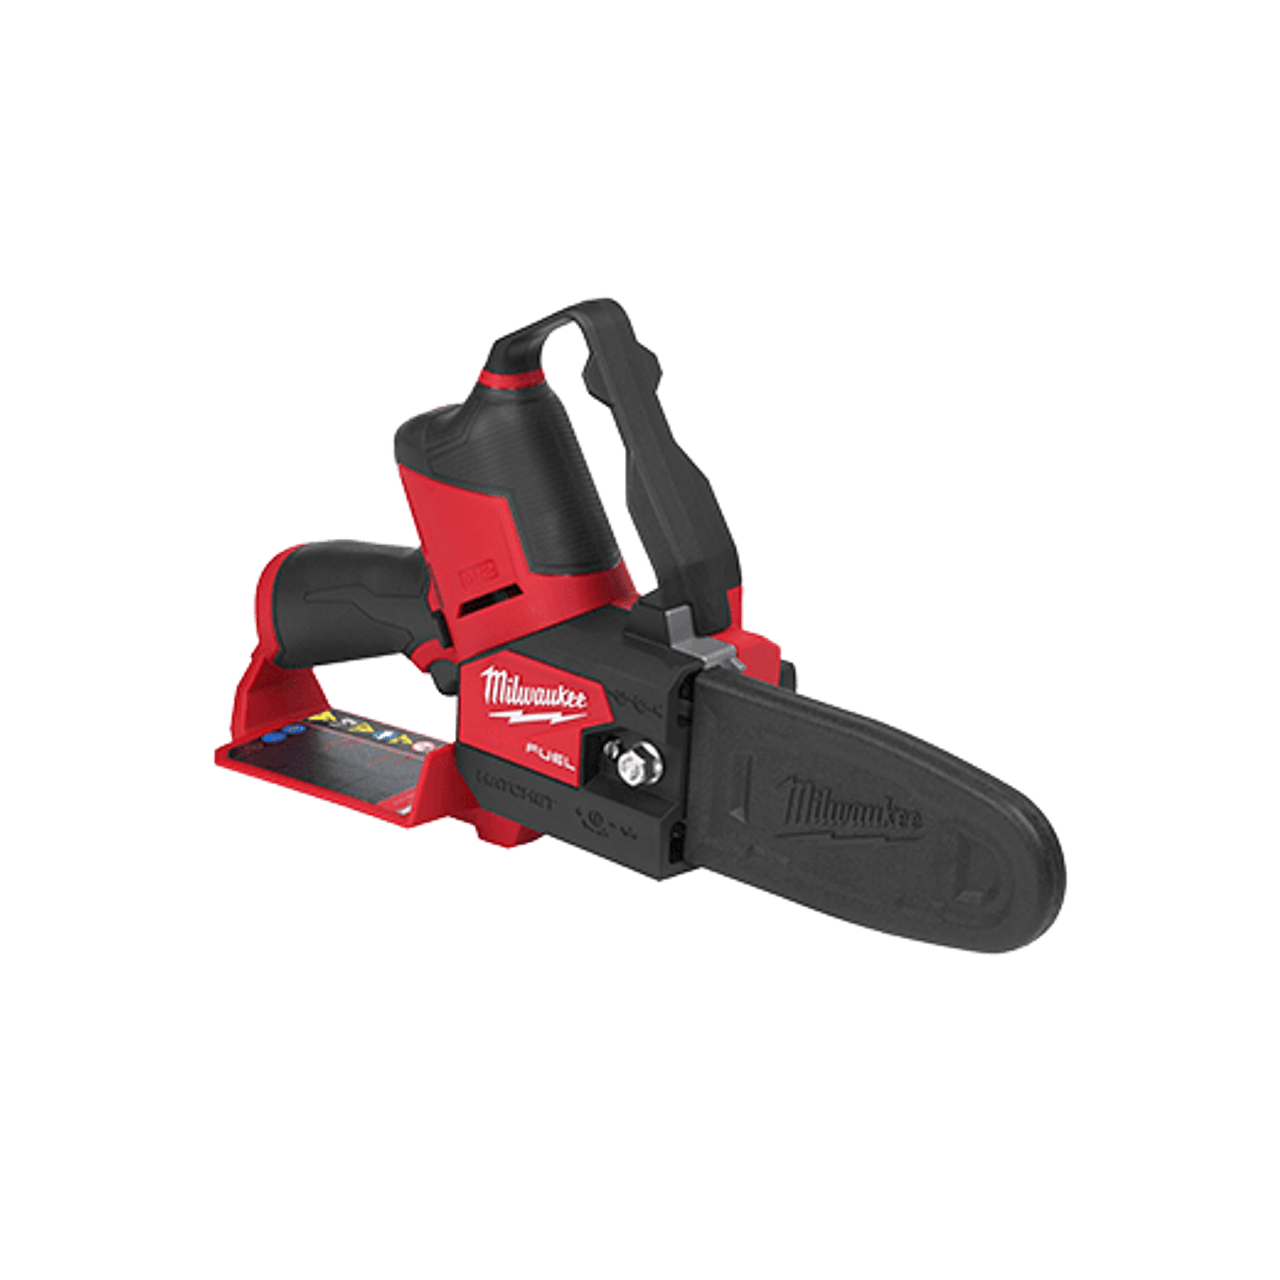 M12 FUEL HATCHET 6" Pruning Saw (Tool-Only)